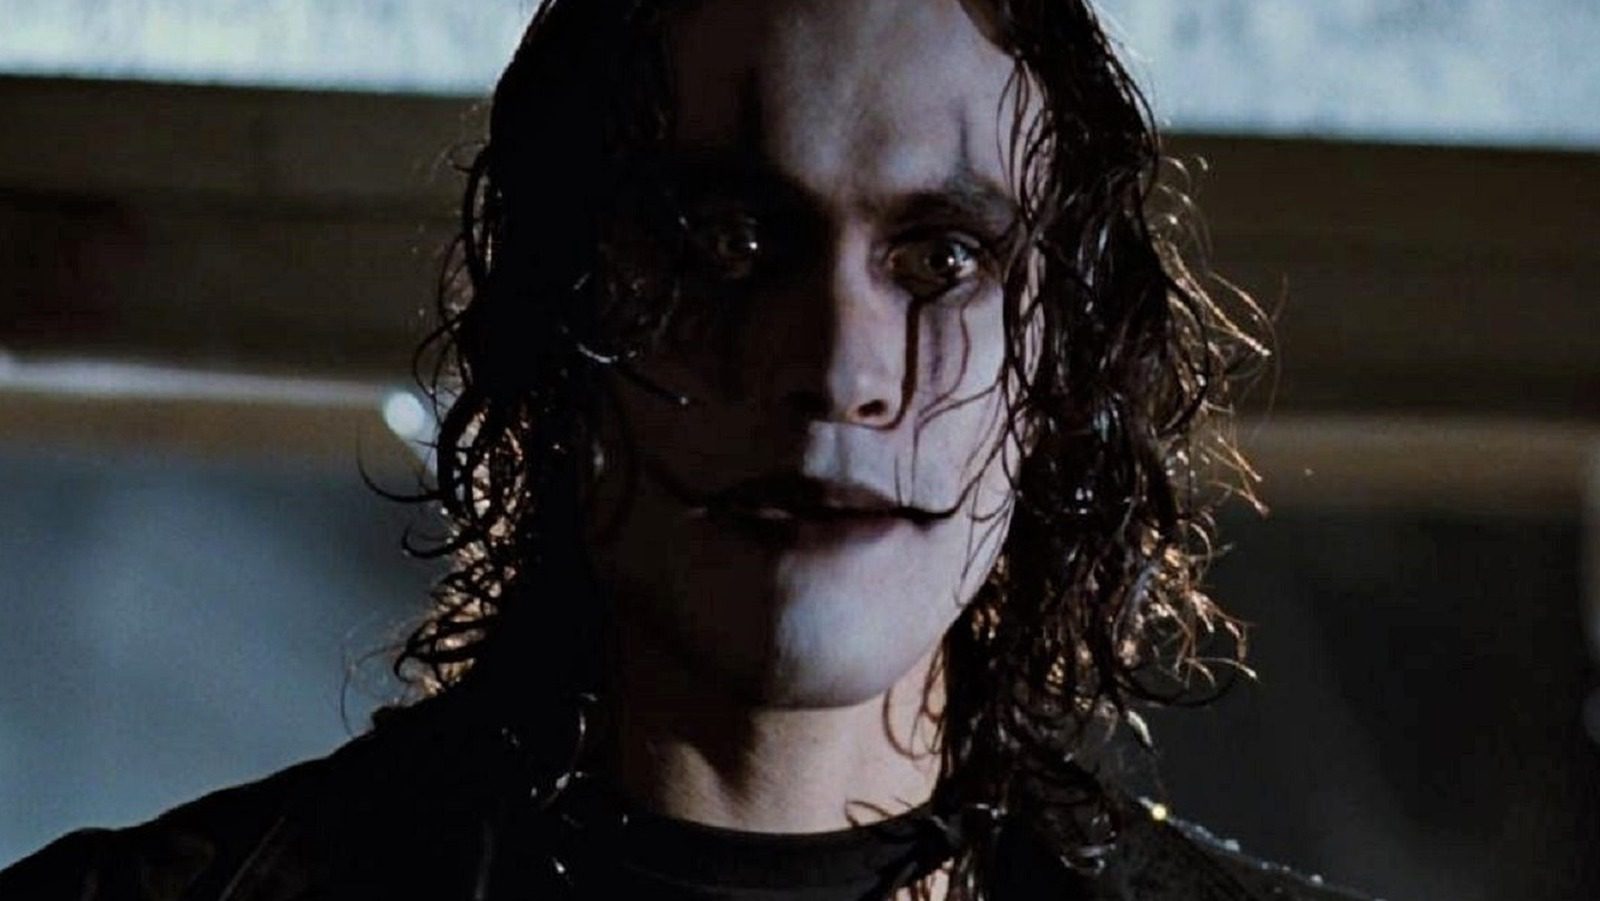 What Are Eric Draven's Powers In The Crow?